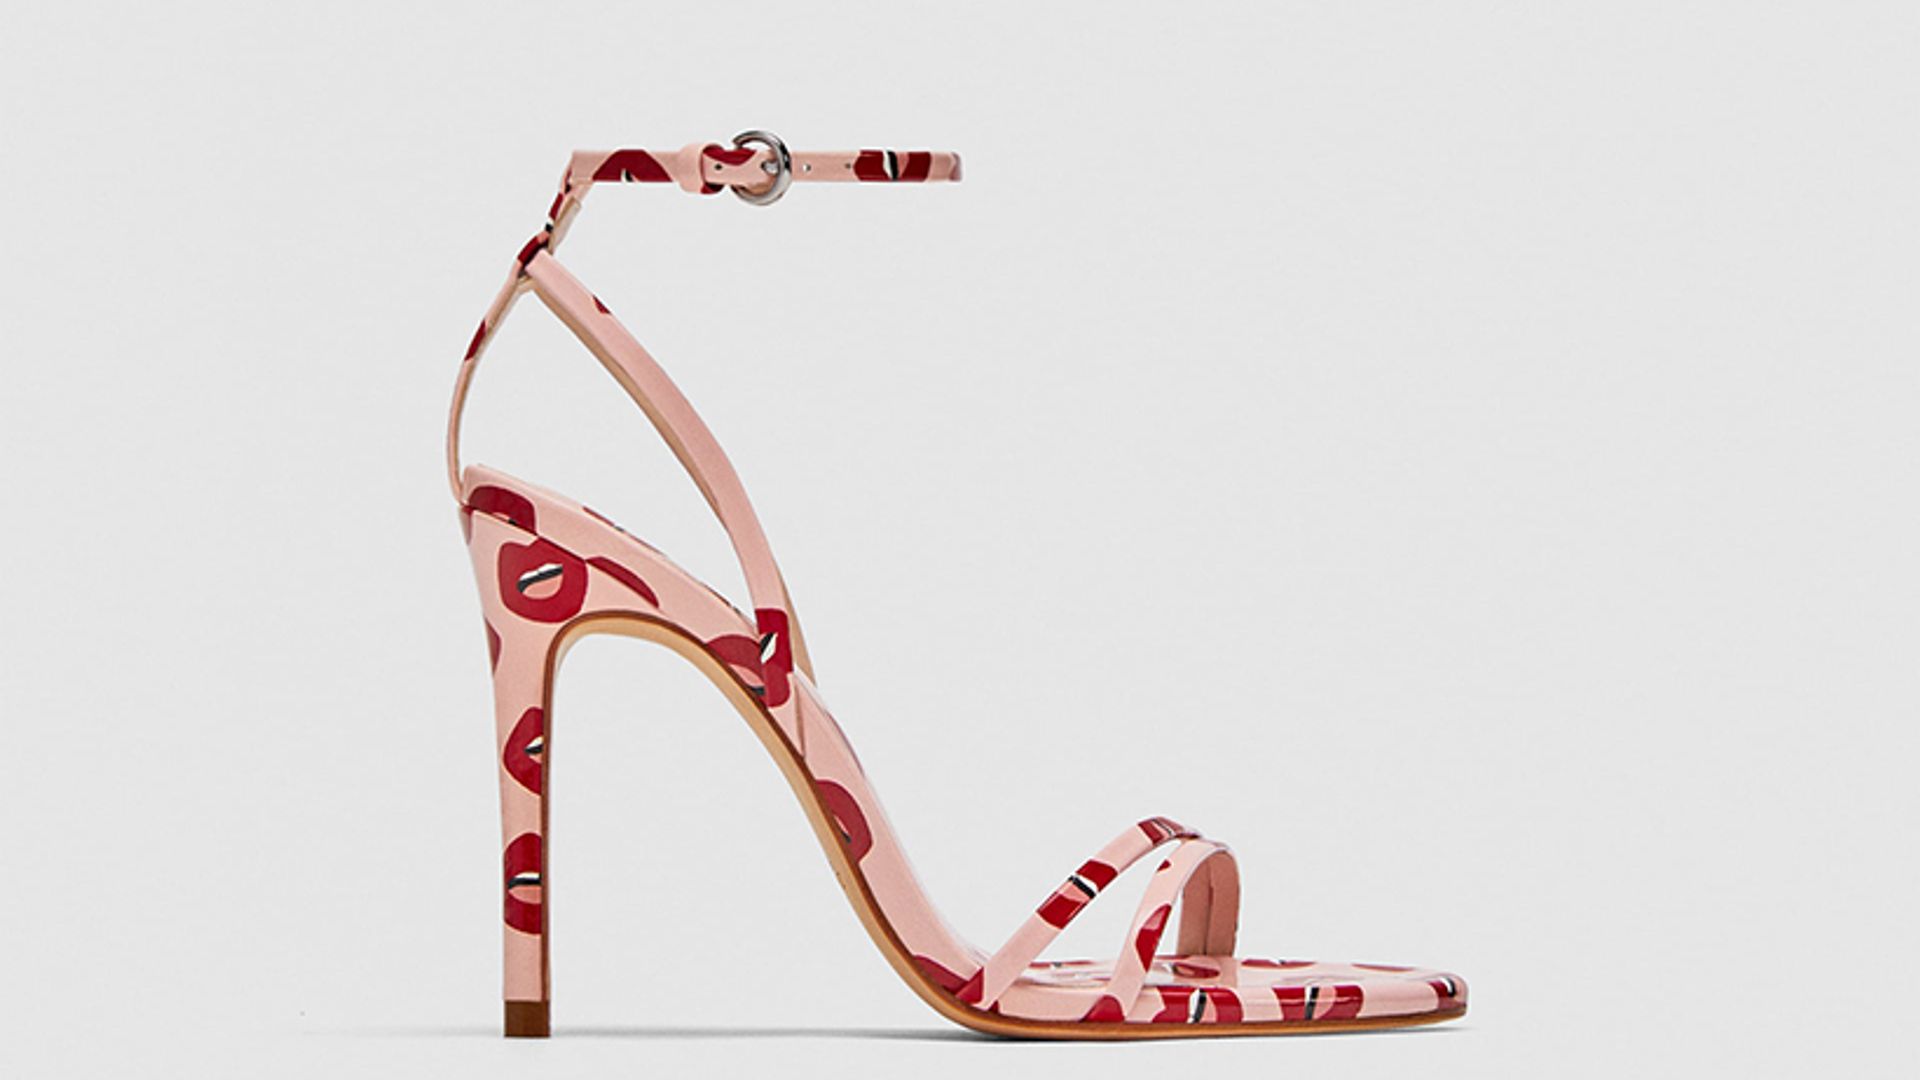 ZARA lip printed pink high heel sandals are available online now | HELLO!